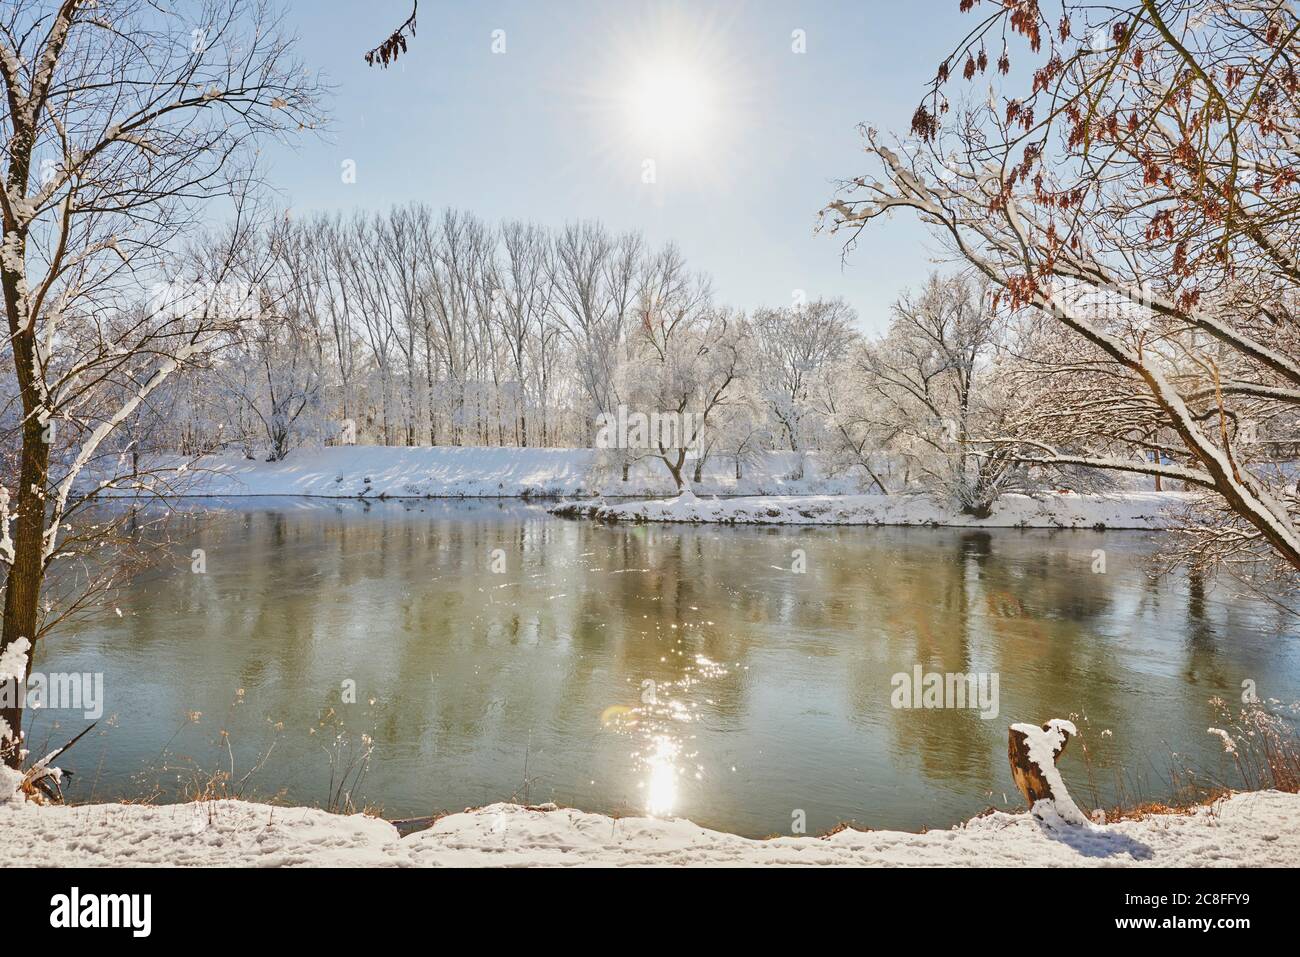 Danube river with snowy trees in winter, Germany, Bavaria, Ratisbon Stock Photo